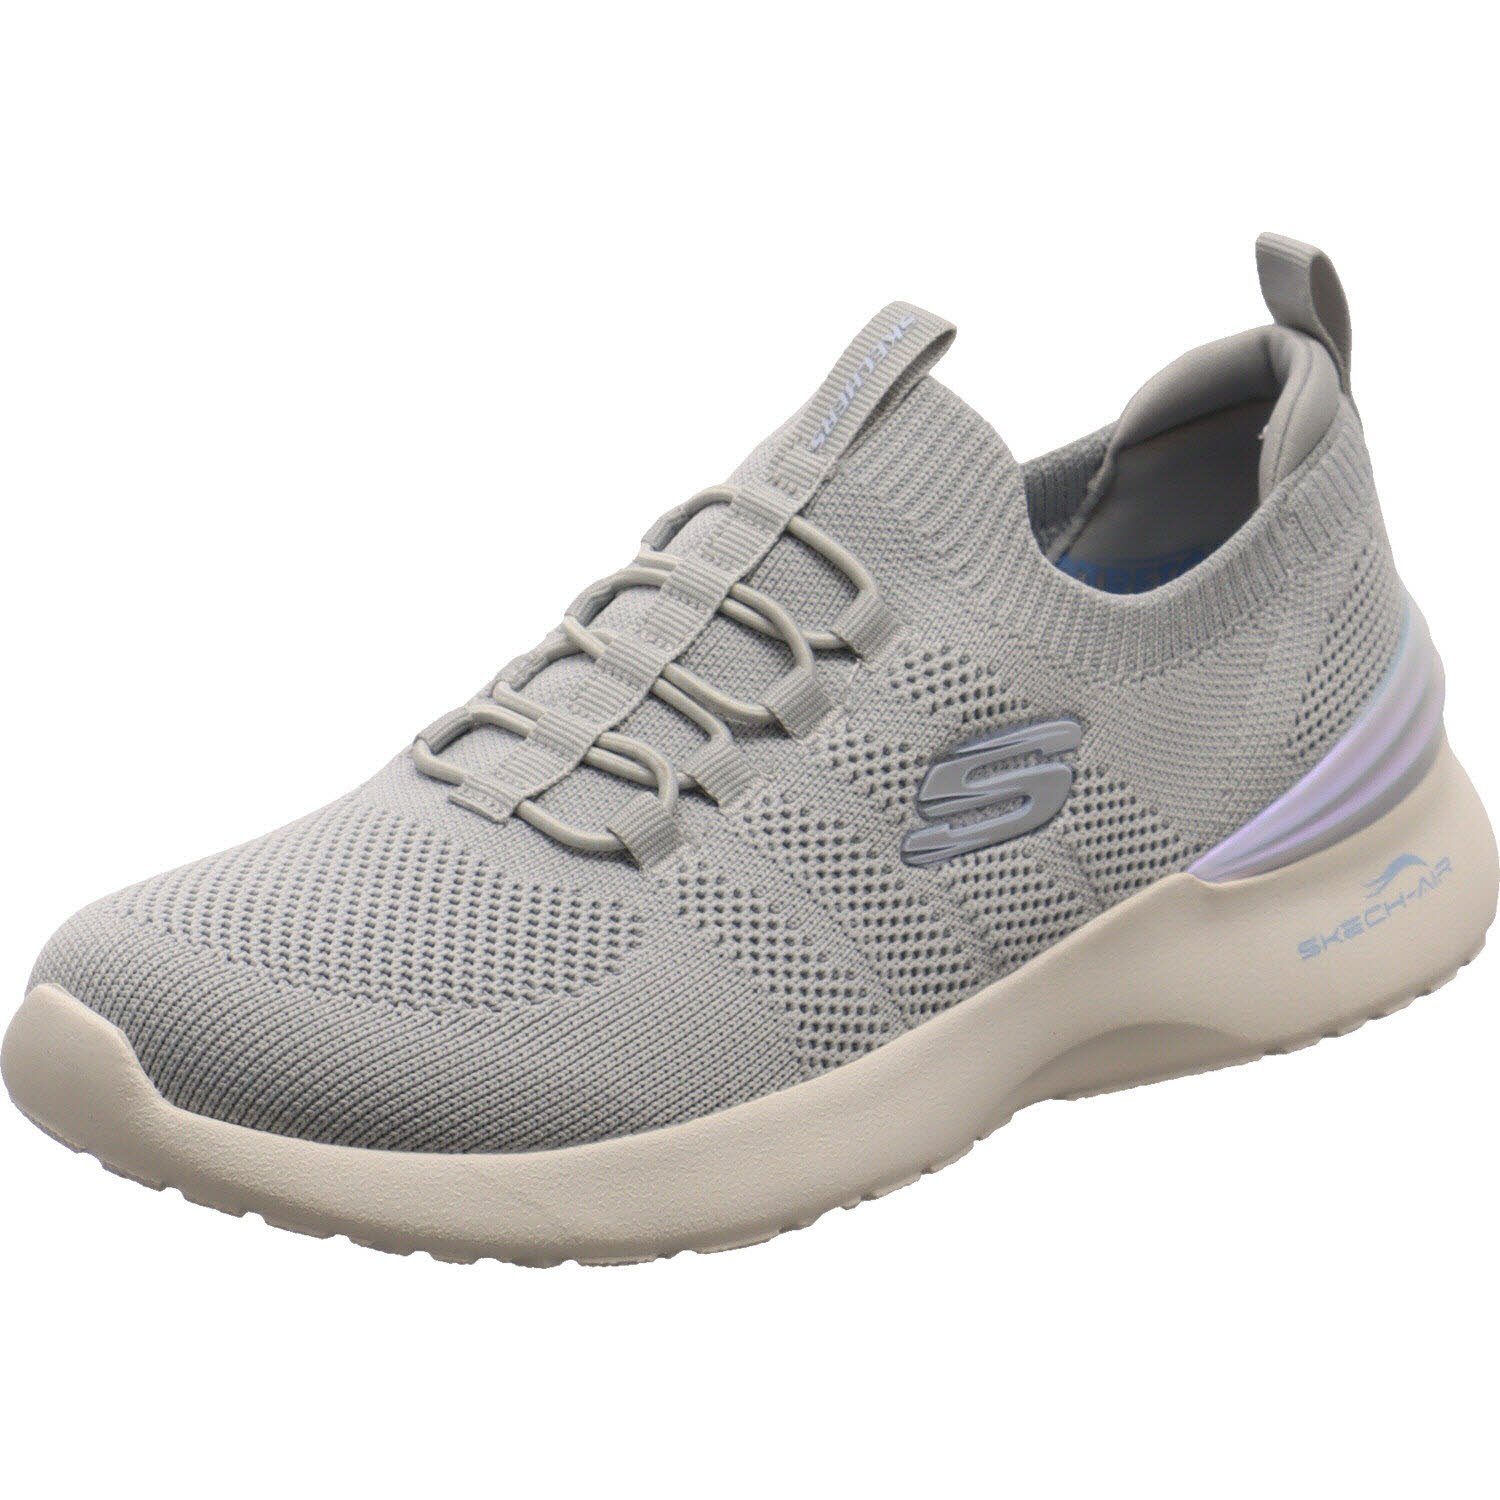 Skechers Skech-Air - Perfects Dynamight Slipper